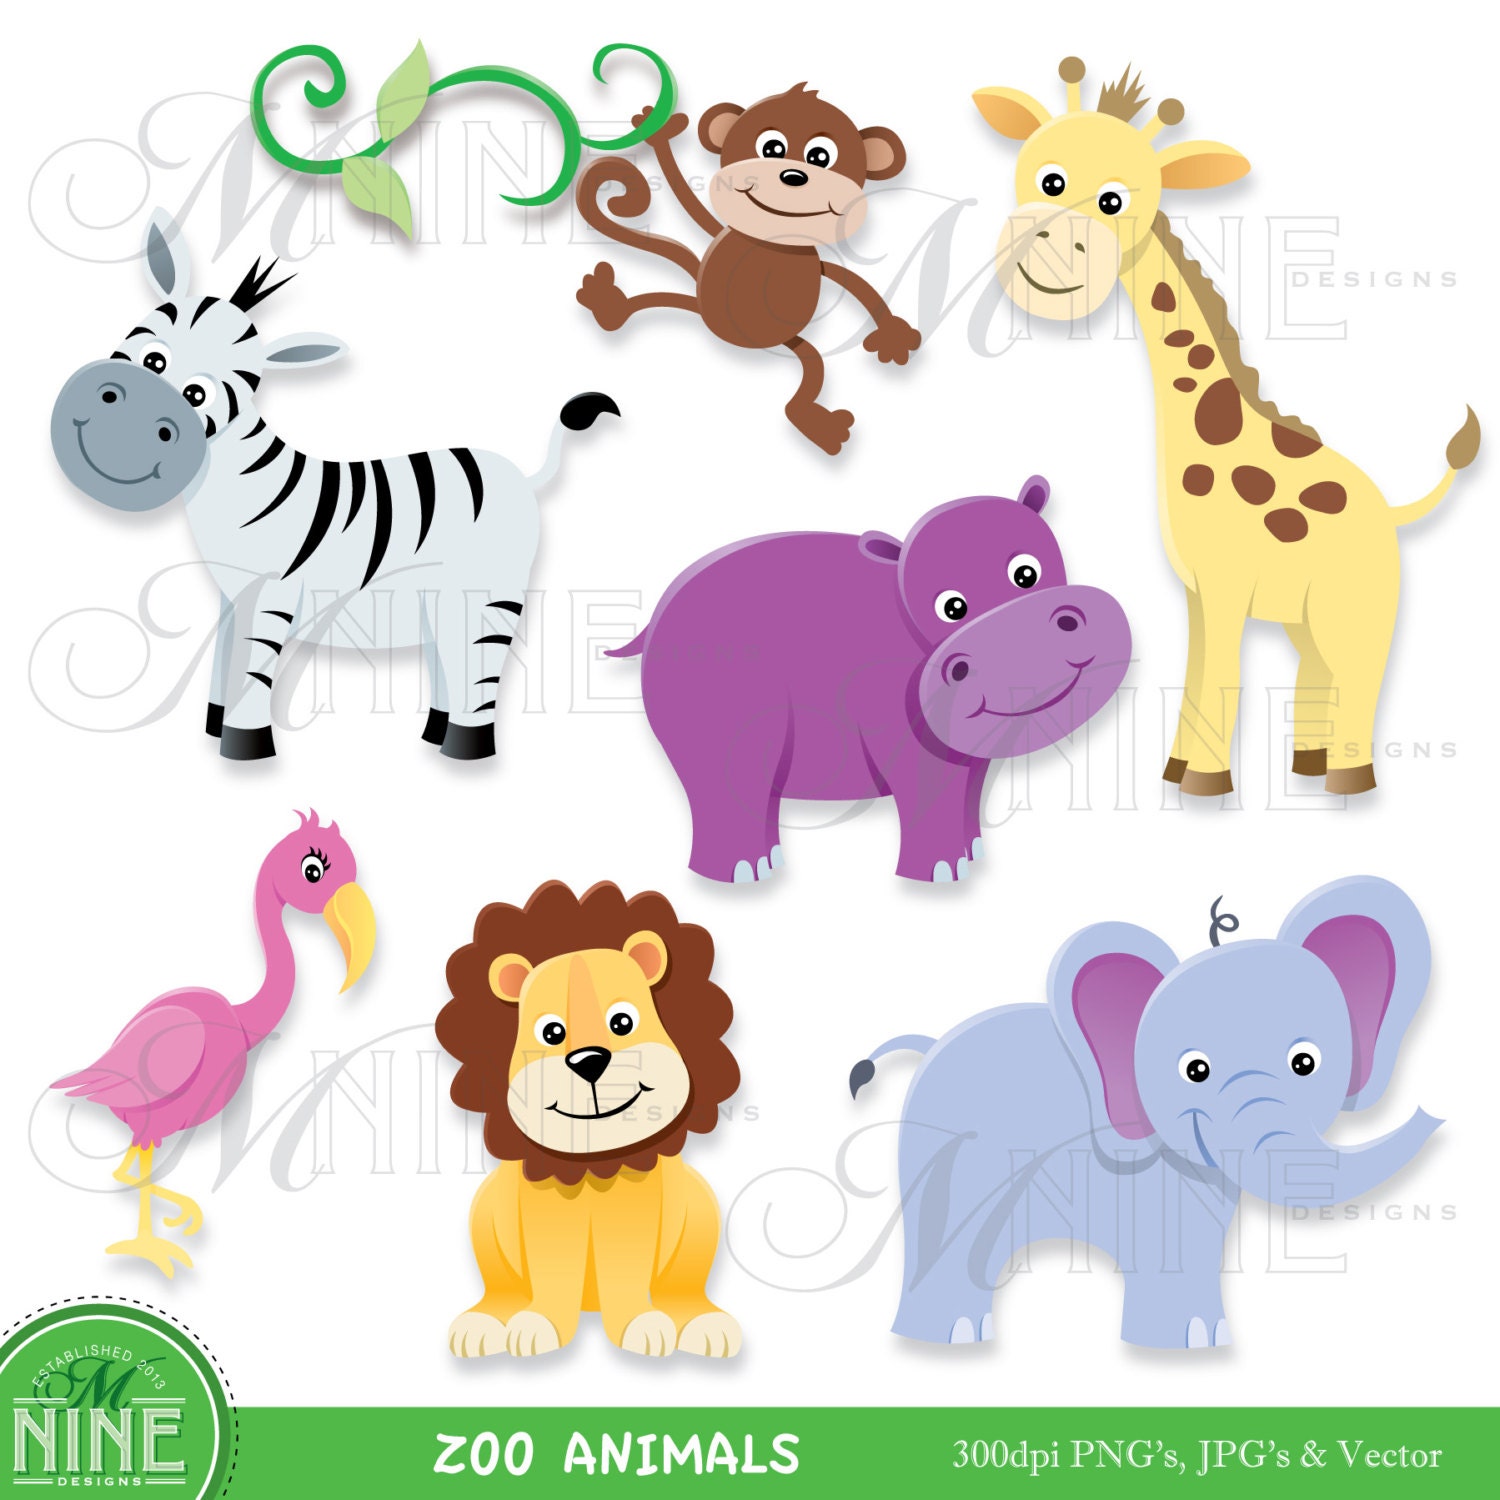 clipart images of zoo animals - photo #29